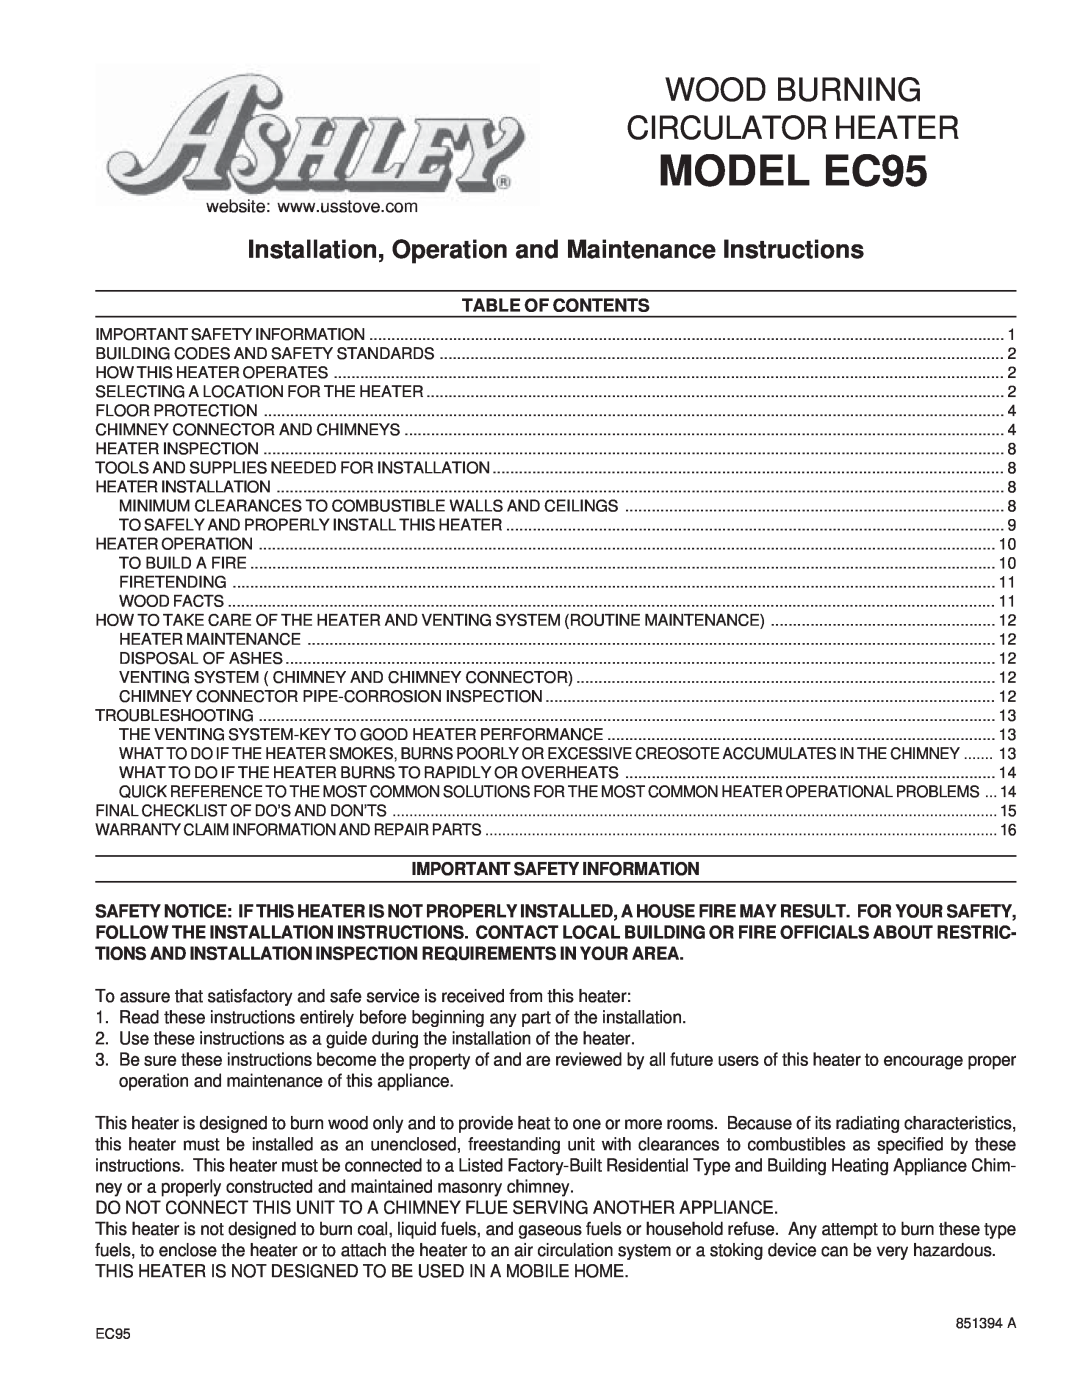 United States Stove warranty Table Of Contents, MODEL EC95, Wood Burning, Circulator Heater 